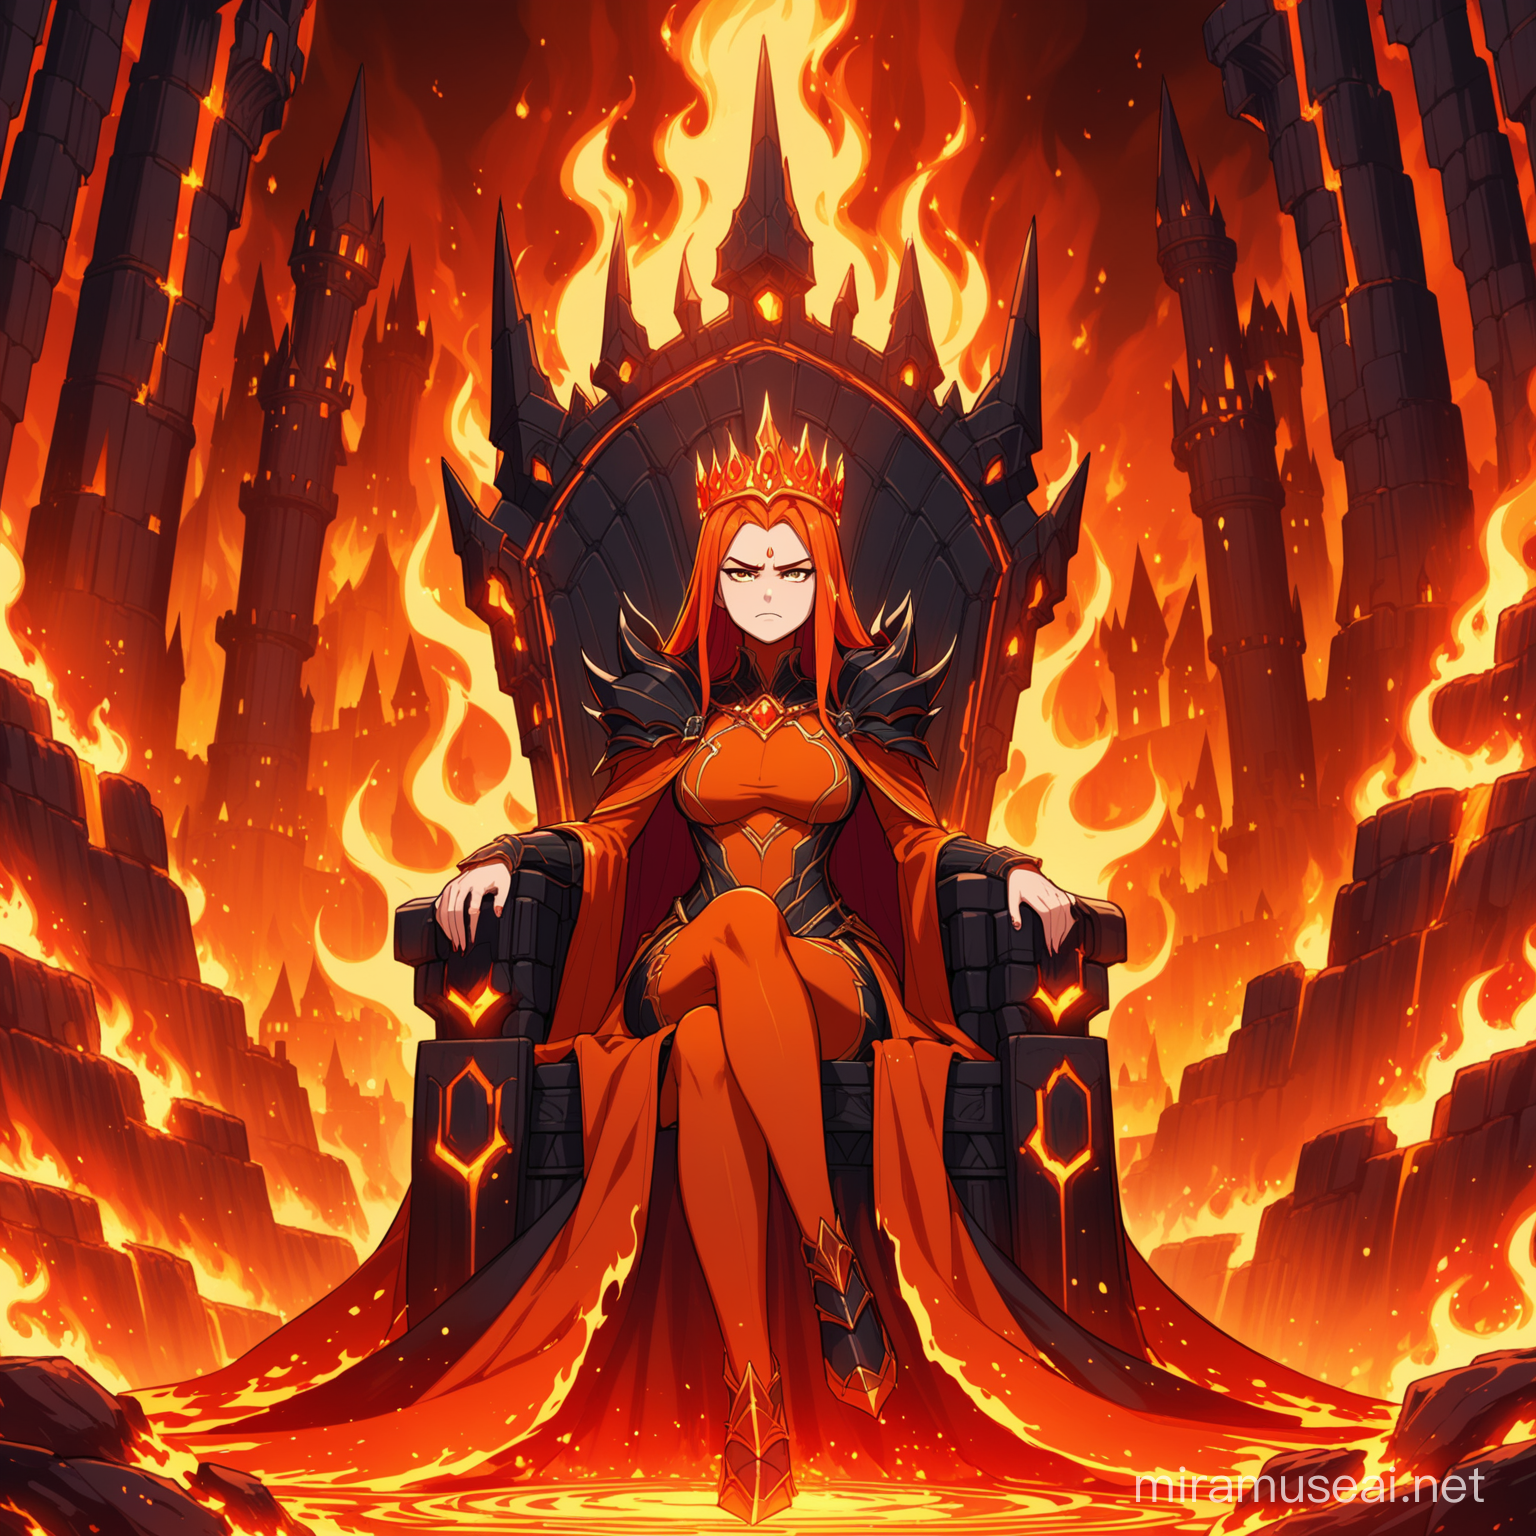 Description: The Lava Queen sits on her throne in a grand and fiery castle. She looks bored and frustrated, with flames flickering in the background.
Character: Lava Queen (female), sitting on throne, looking bored.